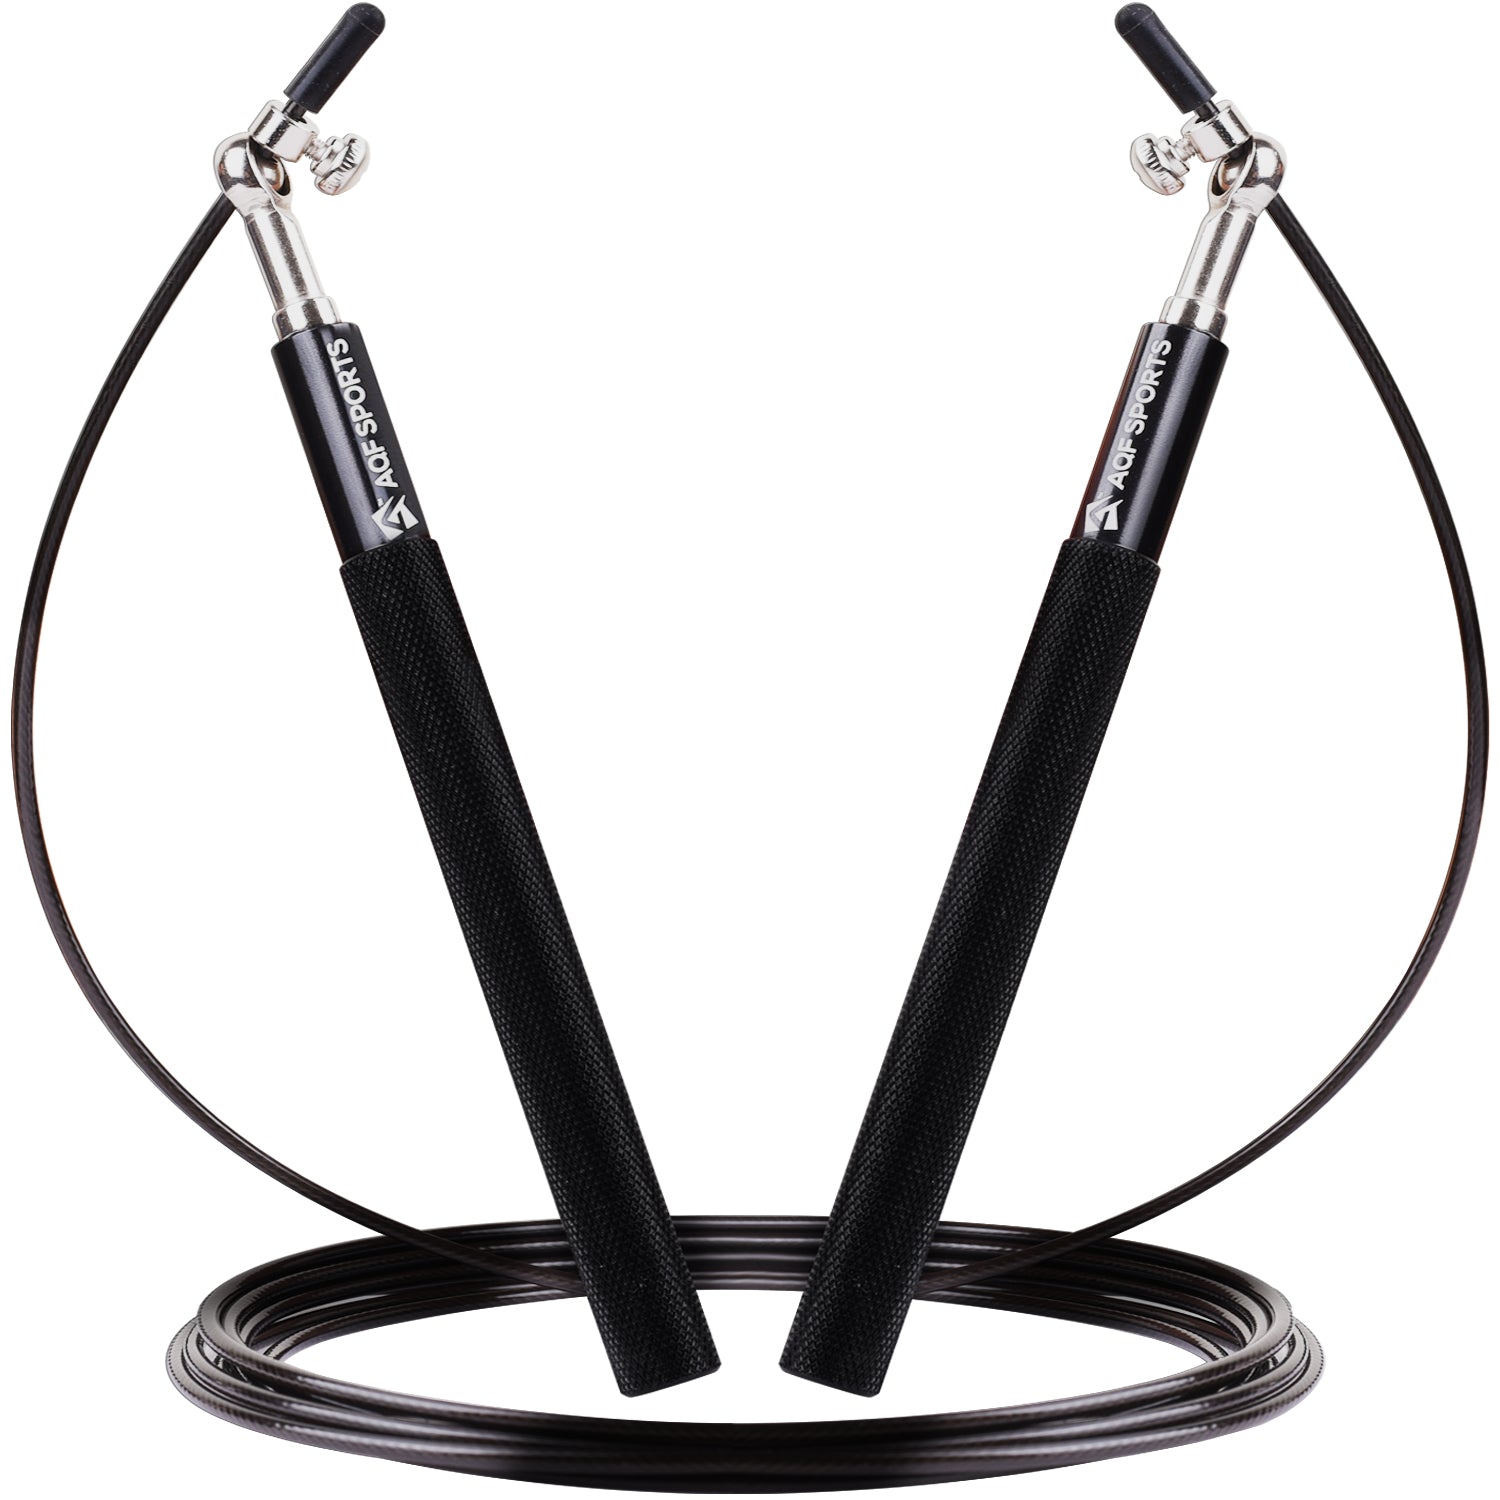 AQF Skipping Rope with Non Slip Alloy Handle & Tangle Free Adjustable Steel Rope